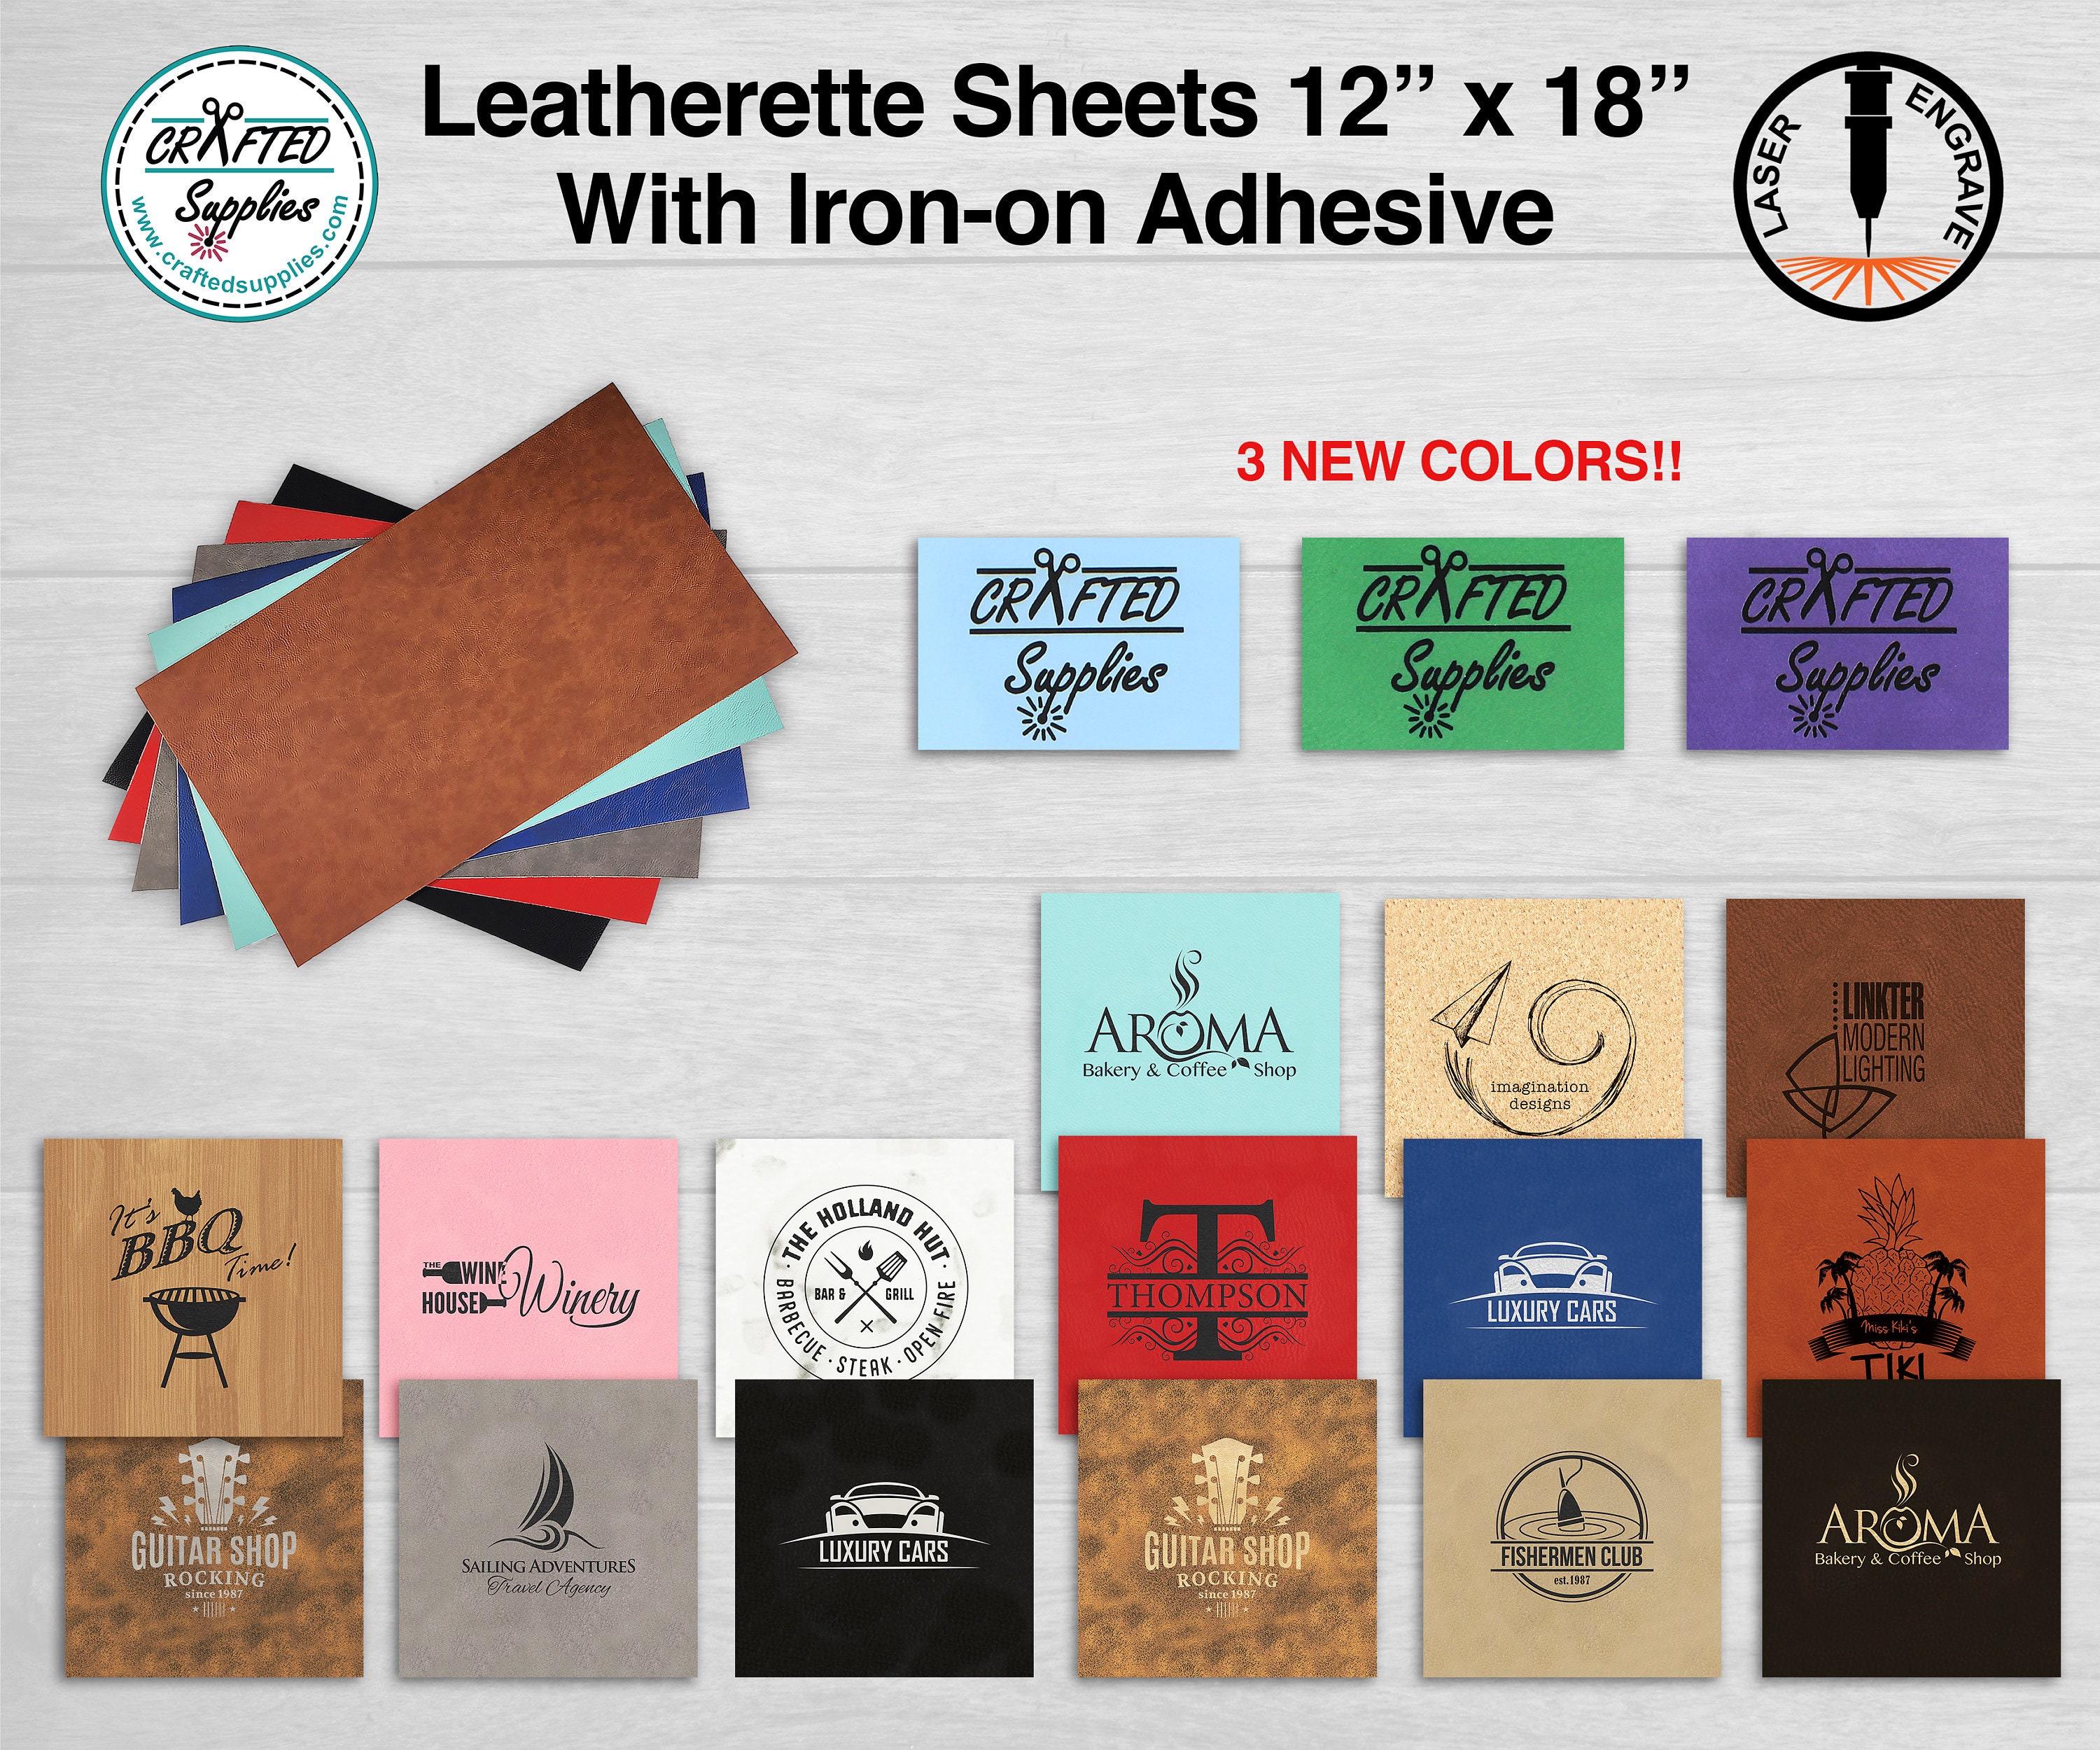 Faux Leather Sheet for Glowforge, Laser Engraver, Cricut, or Craft Supplies  12 X 24 